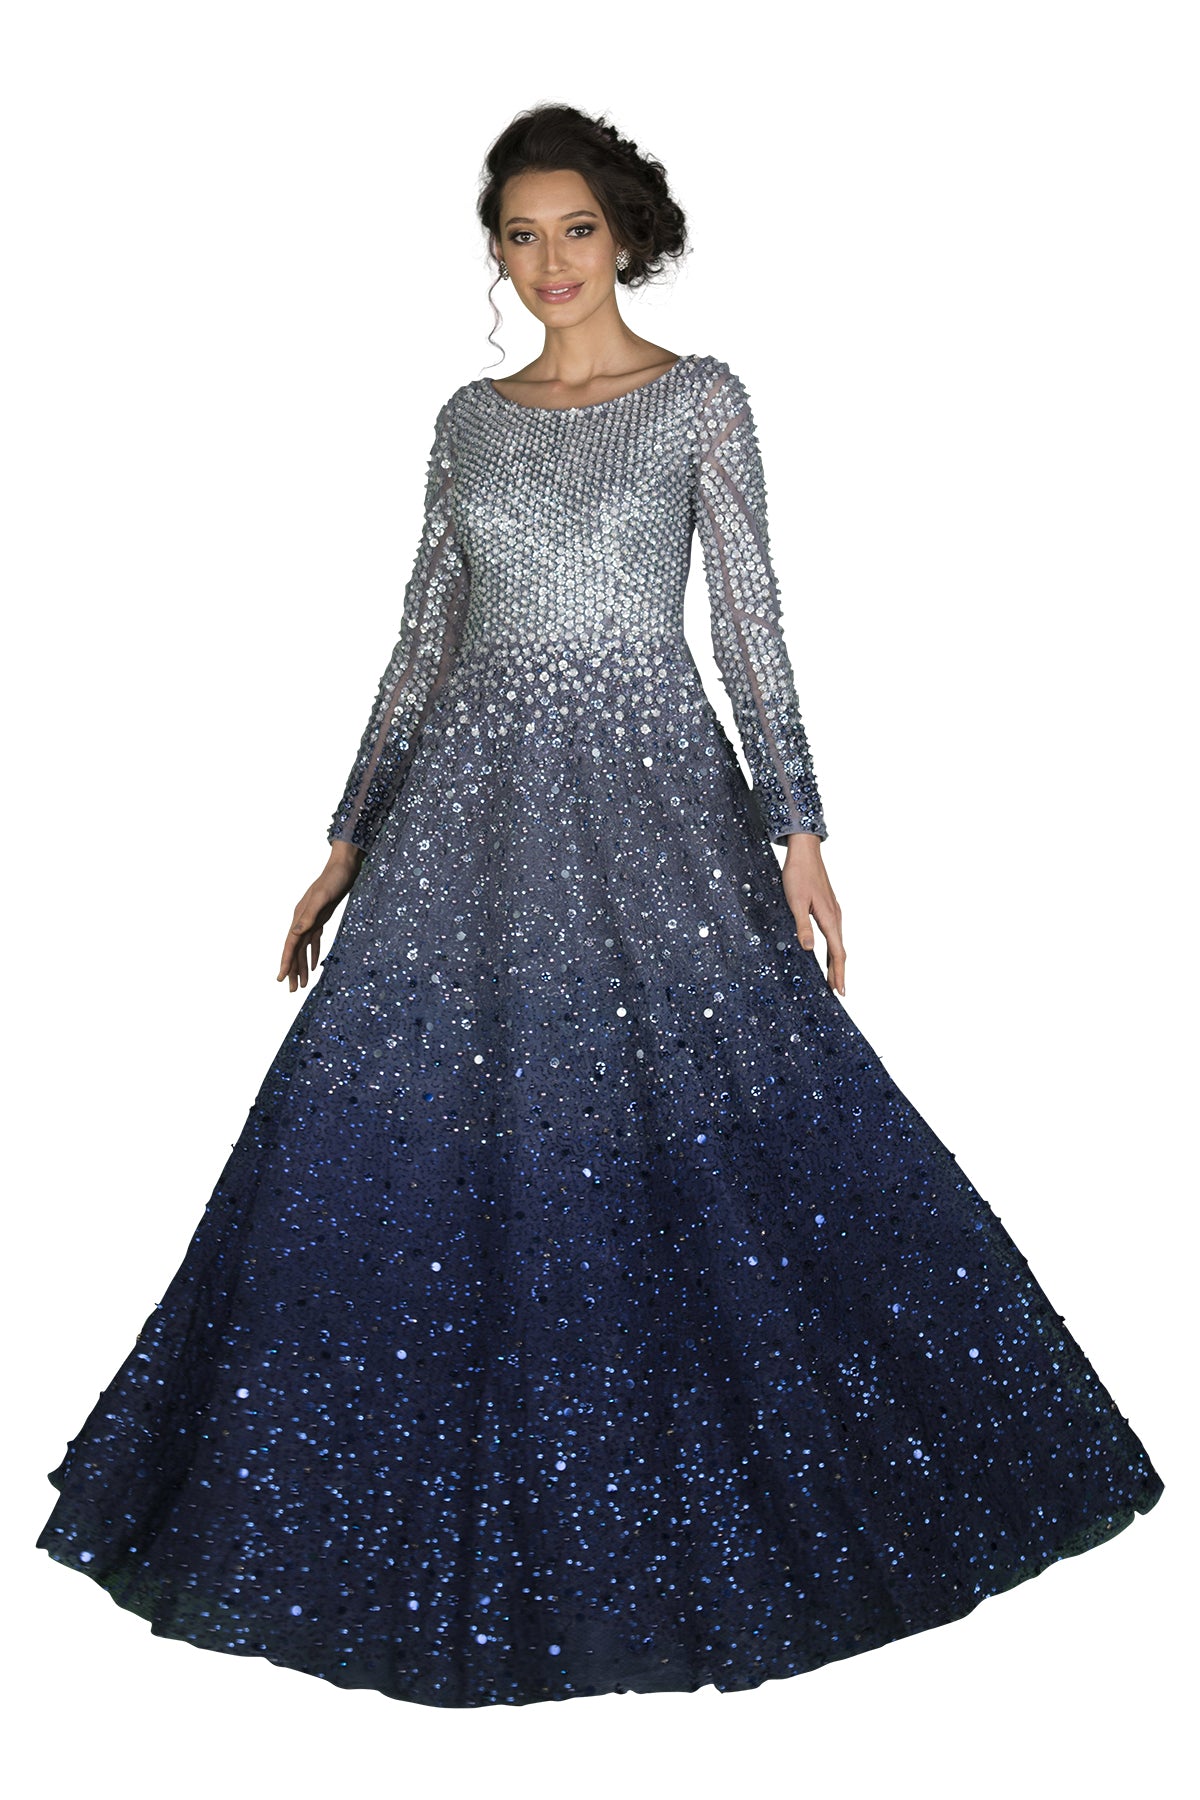 Capture a constellation of stars in this stunning ombre to navy blue shaded gown - embellished with silver from head to toe!